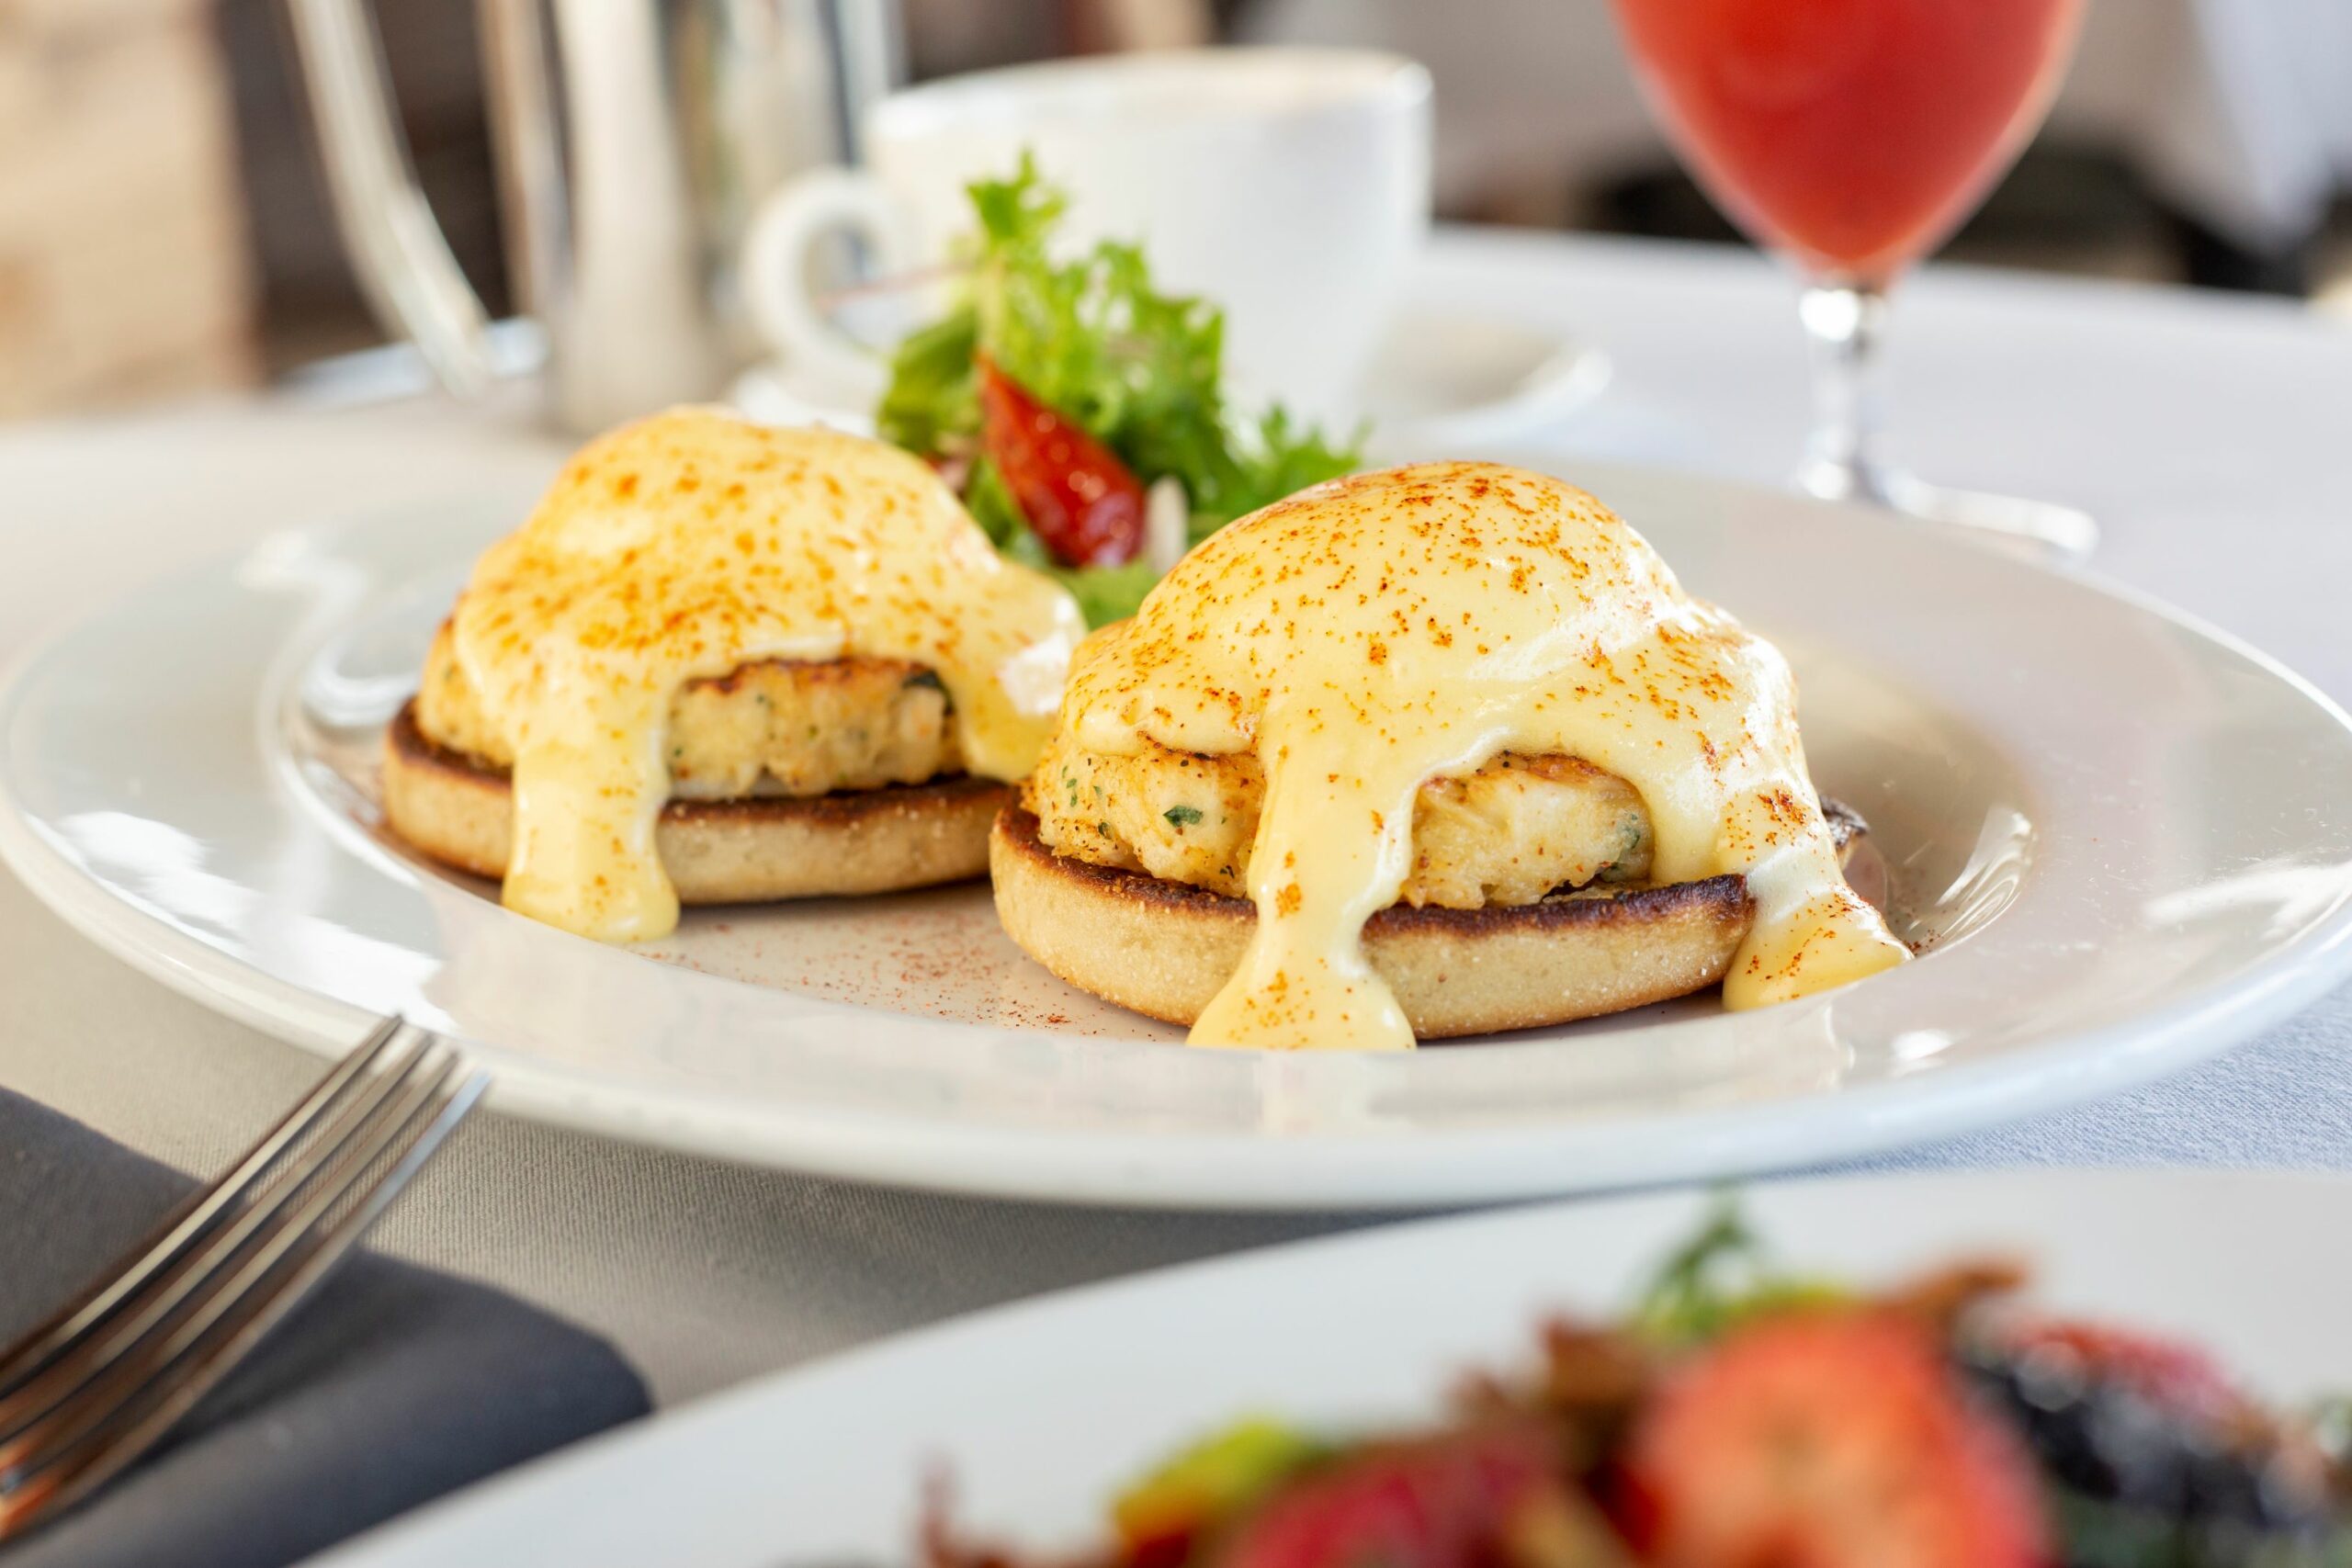 An image of the Crabcake Eggs Benedict, one of the specials at Ocean Prime's Father's Day brunch.